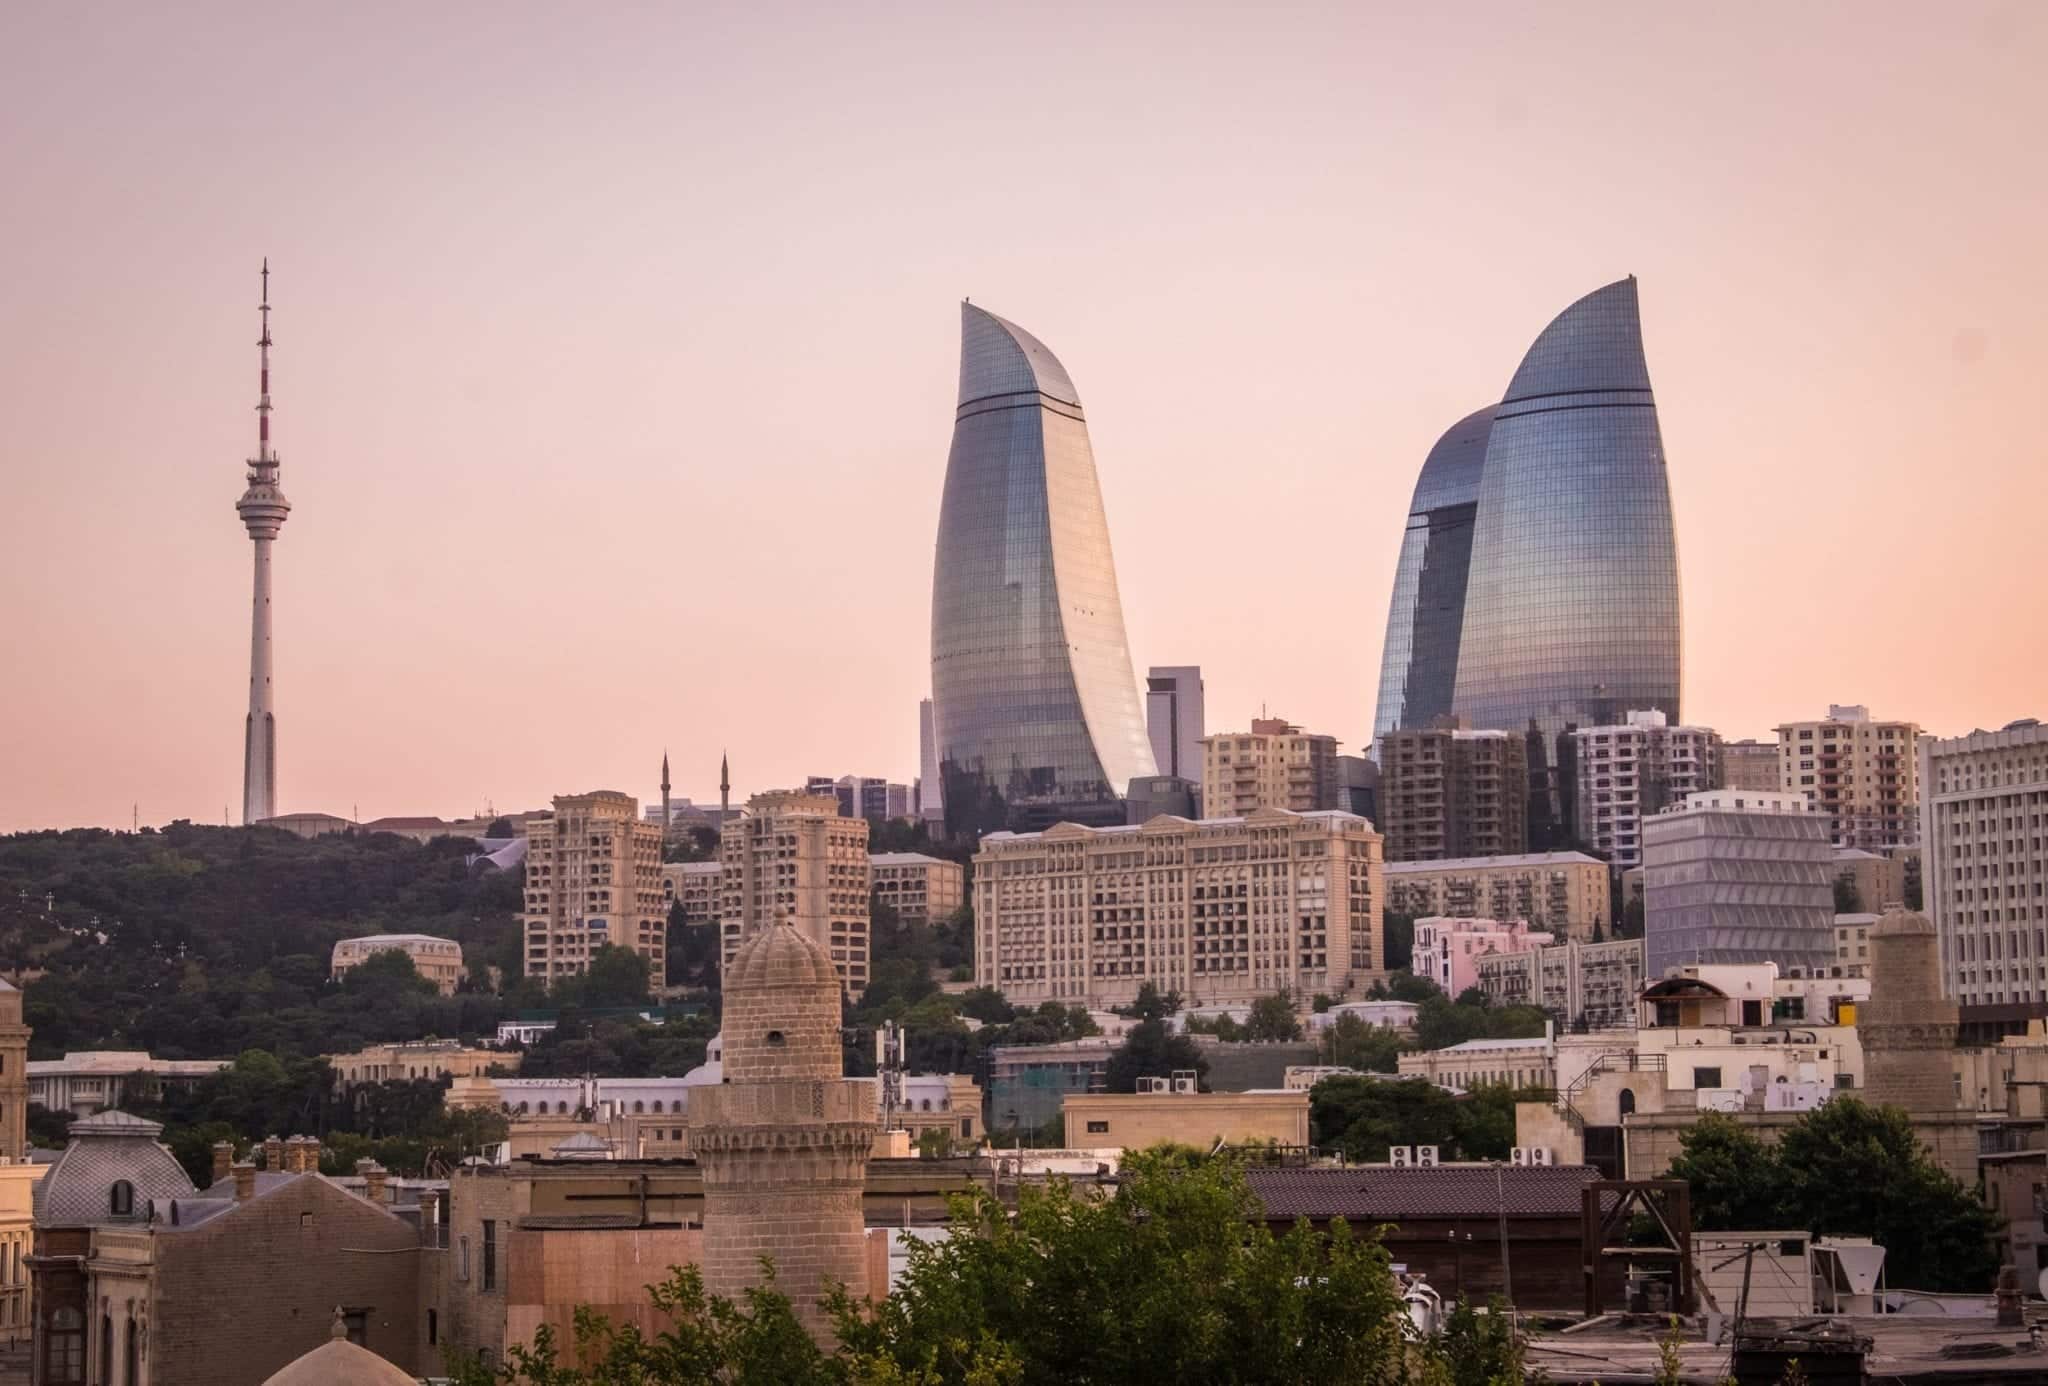 The three Flame Towers in Baku, Azerbaijan look blueish-purple against a pink sky at dusk. Underneath are smaller buildings and to the left is the city's tall, skinny TV tower.